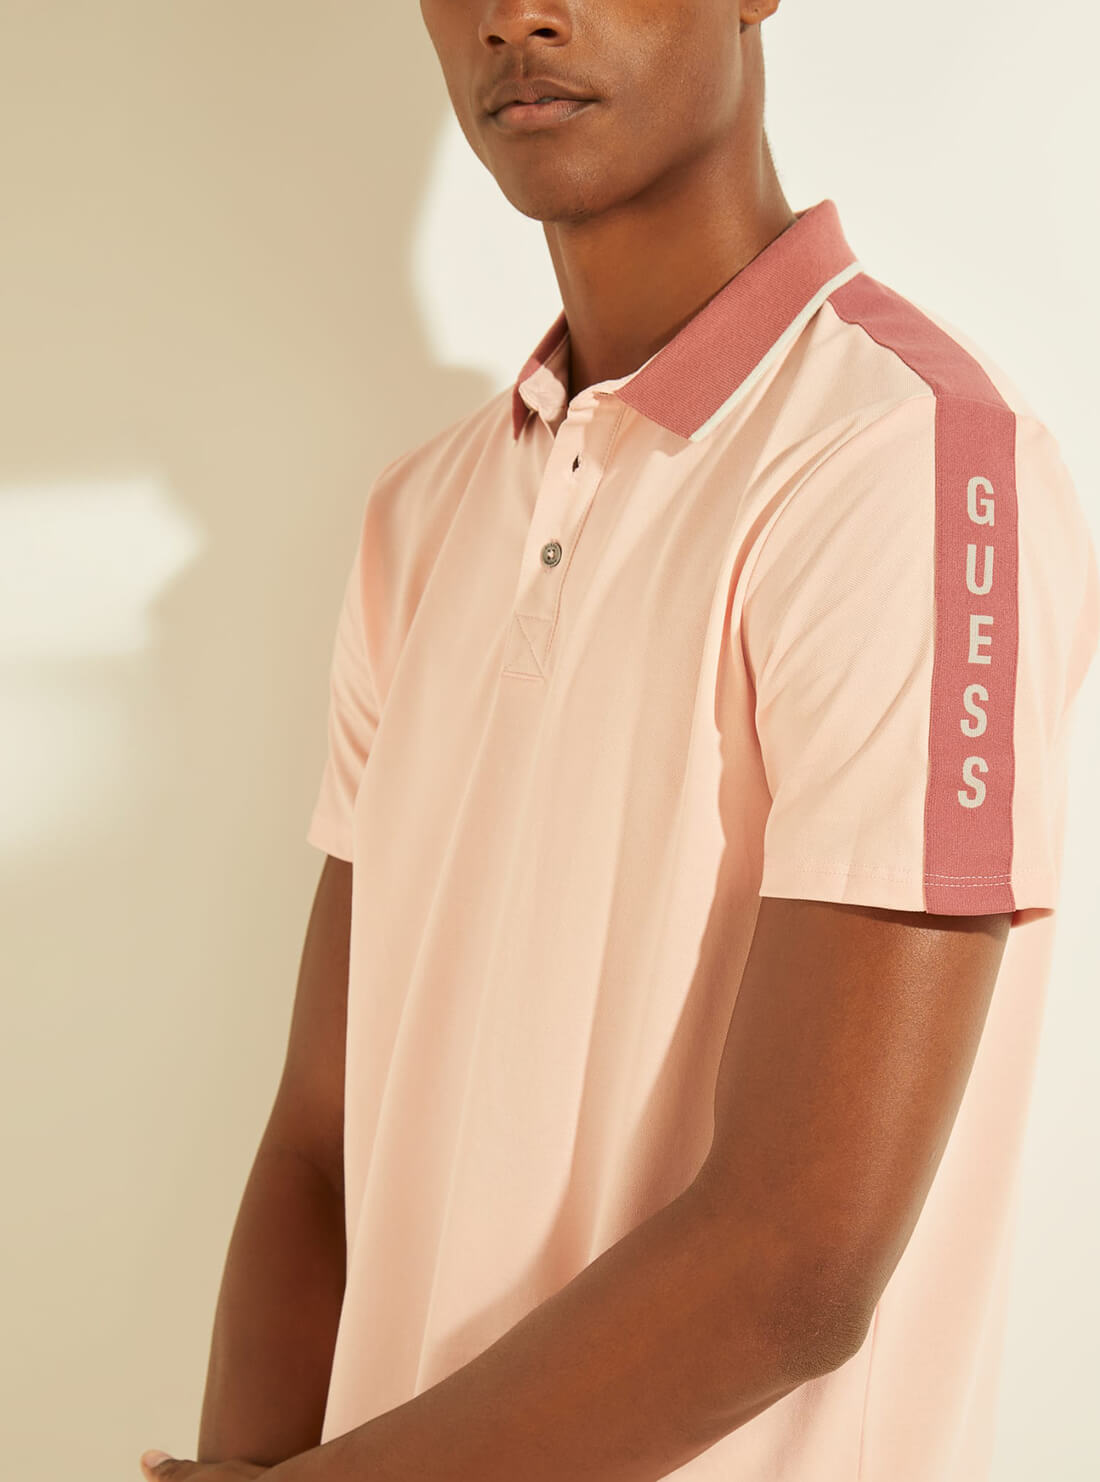 GUESS Mens Blossom Pink Pique Logo Taping Polo T-Shirt M91P71R7PU0 Detail View